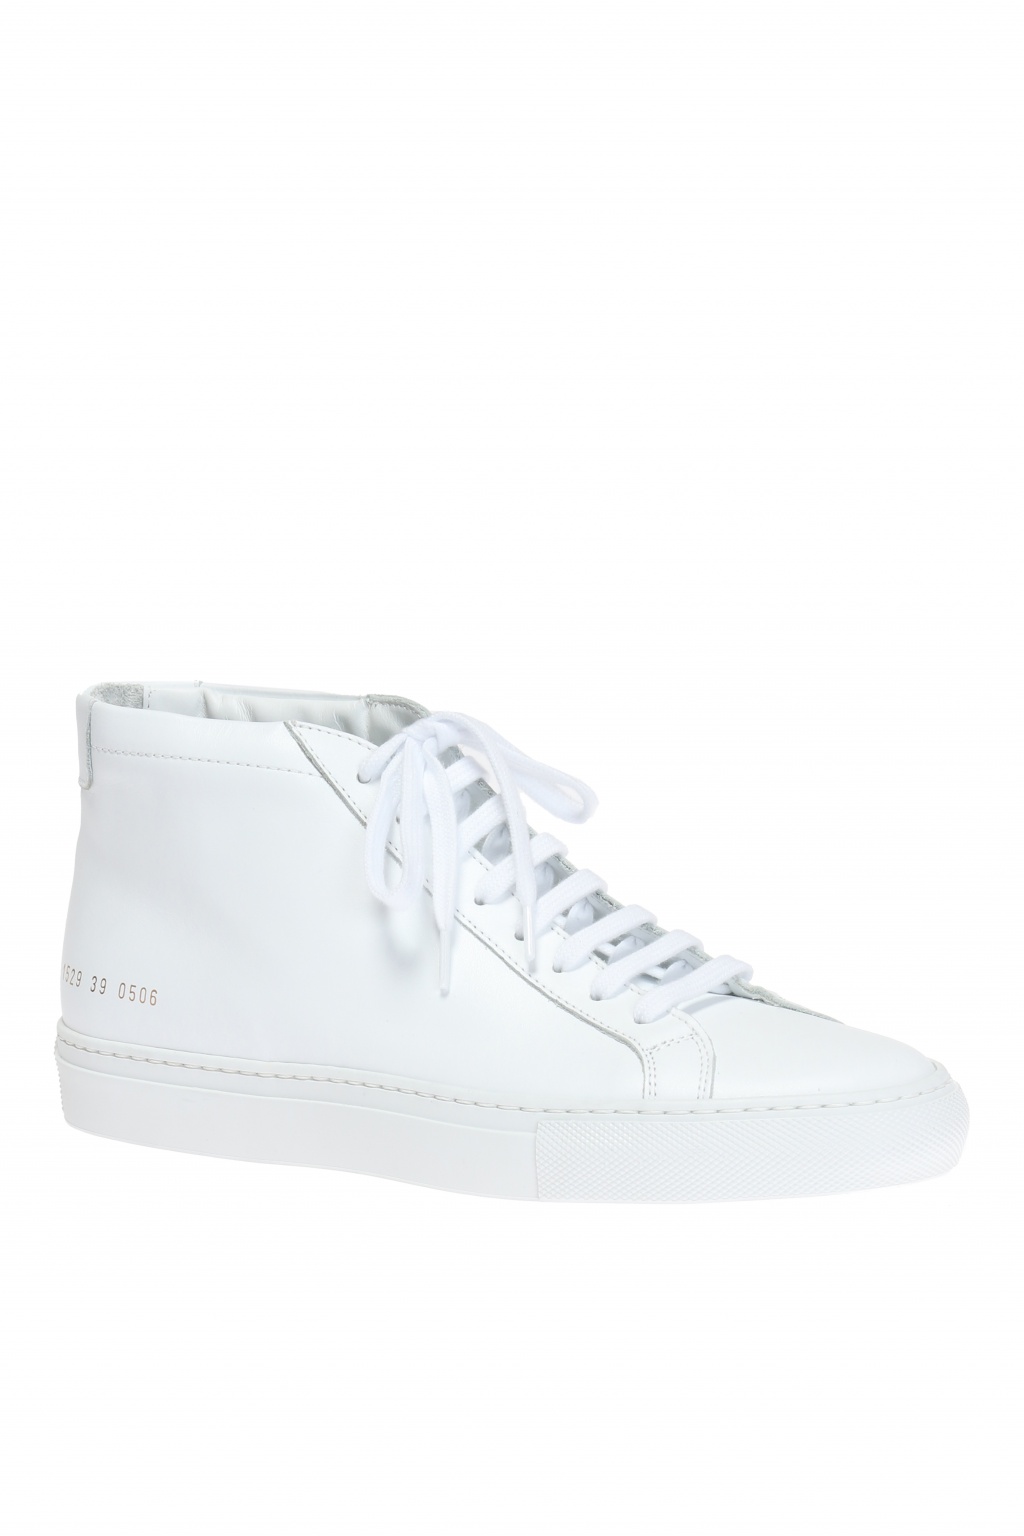 Common Projects 'Specialty Running Stores